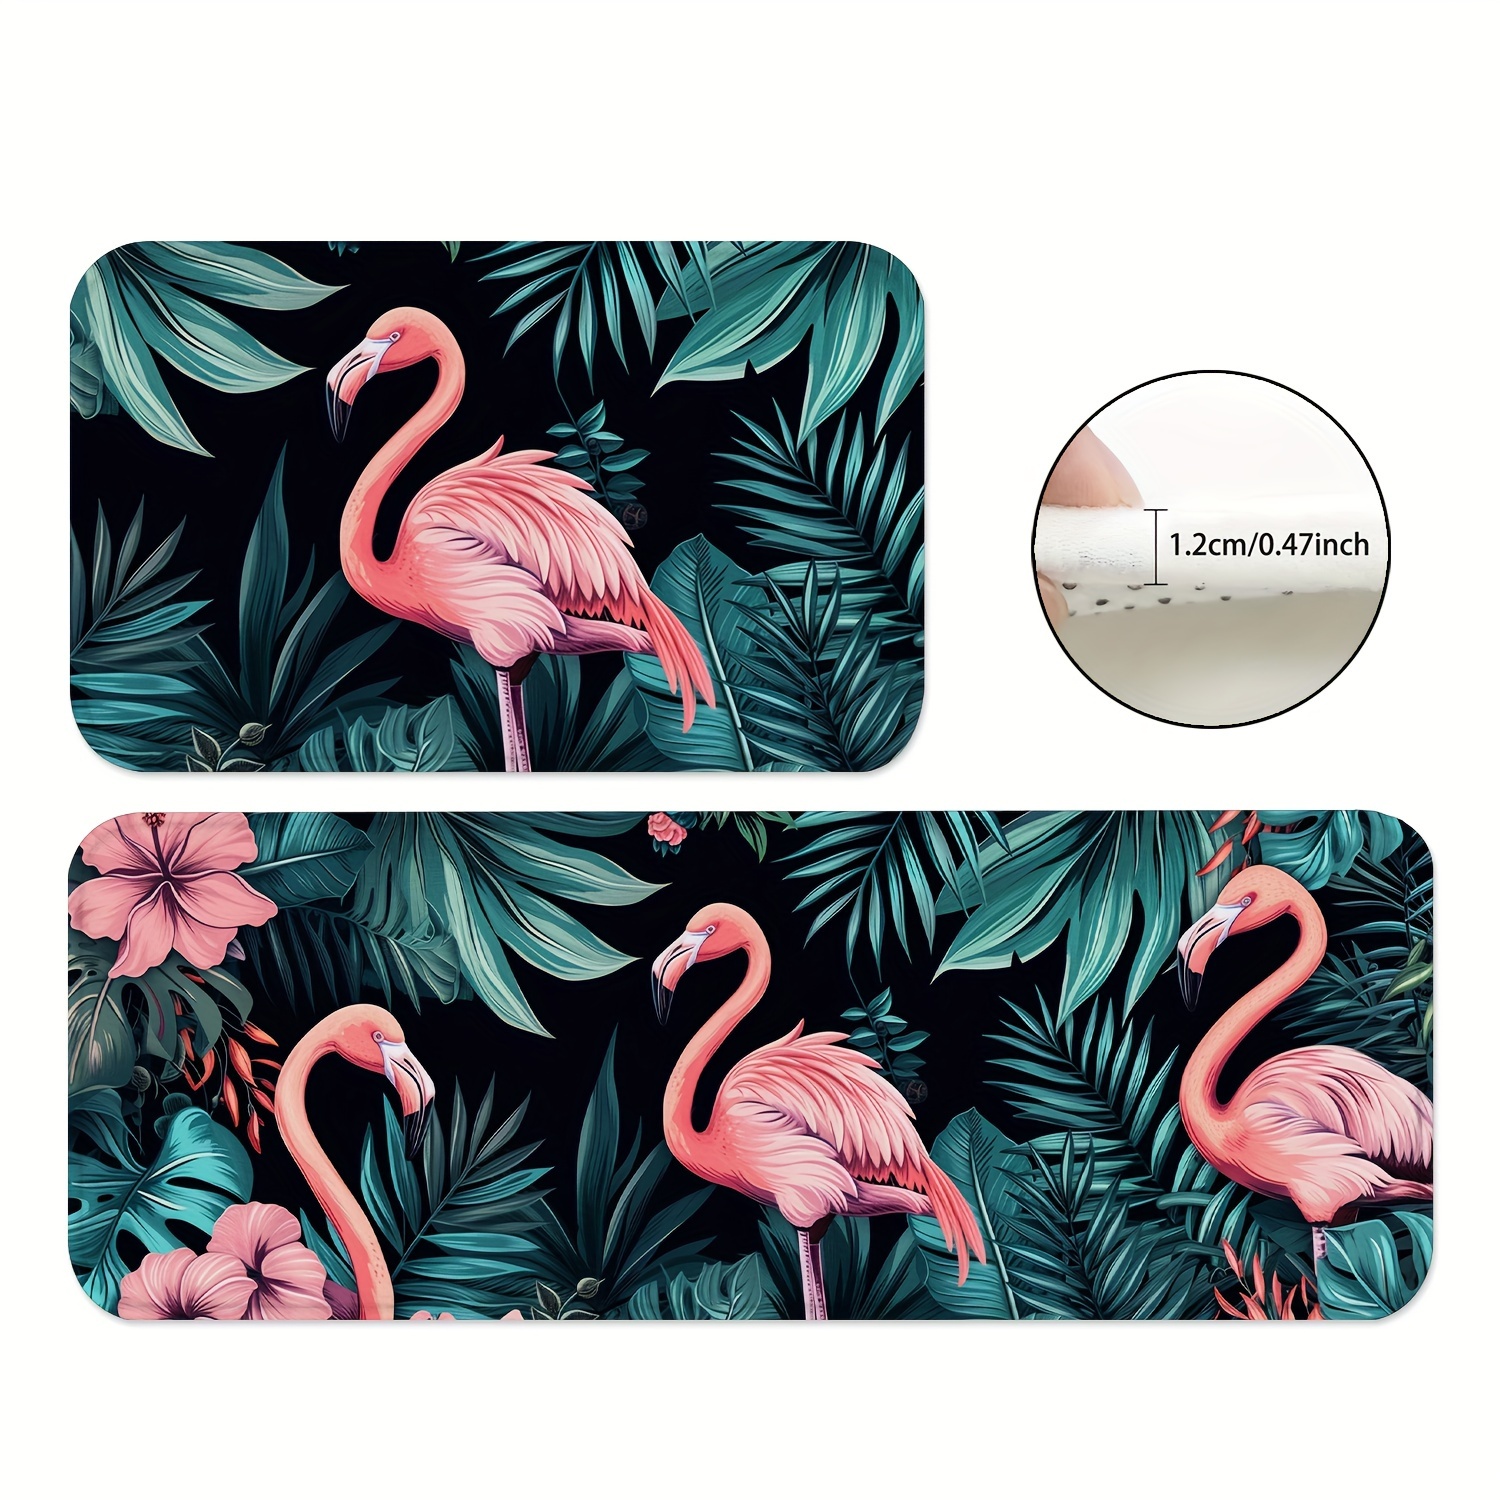 

1/2pcs, Pink Flamingos Mats, Non-slip Backing Rugs, Water Absorbent Carpet For Playroom, Classroom, Bathroom, Dining Table, Kitchen, Area Rug, Home Decor, Room Decor, Spring Decor, Gift